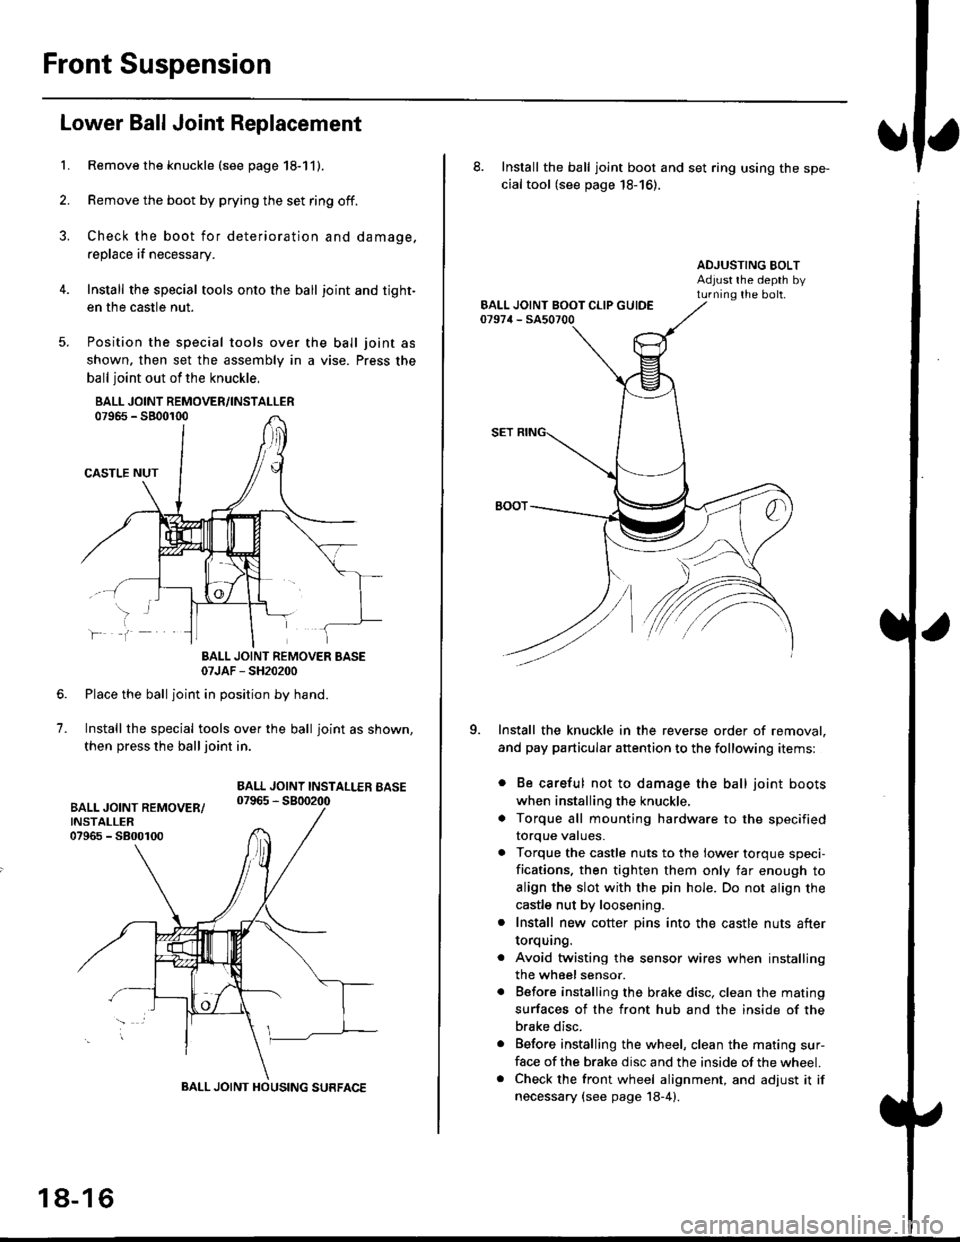 HONDA CIVIC 1996 6.G Owners Guide Front Suspension
L
Lower Ball Joint Replacement
Remove the knuckle (see page 18-11).
Remove the boot by prying the set ring off.
Check the boot for deterioration and damage.
replace if necessary.
Inst